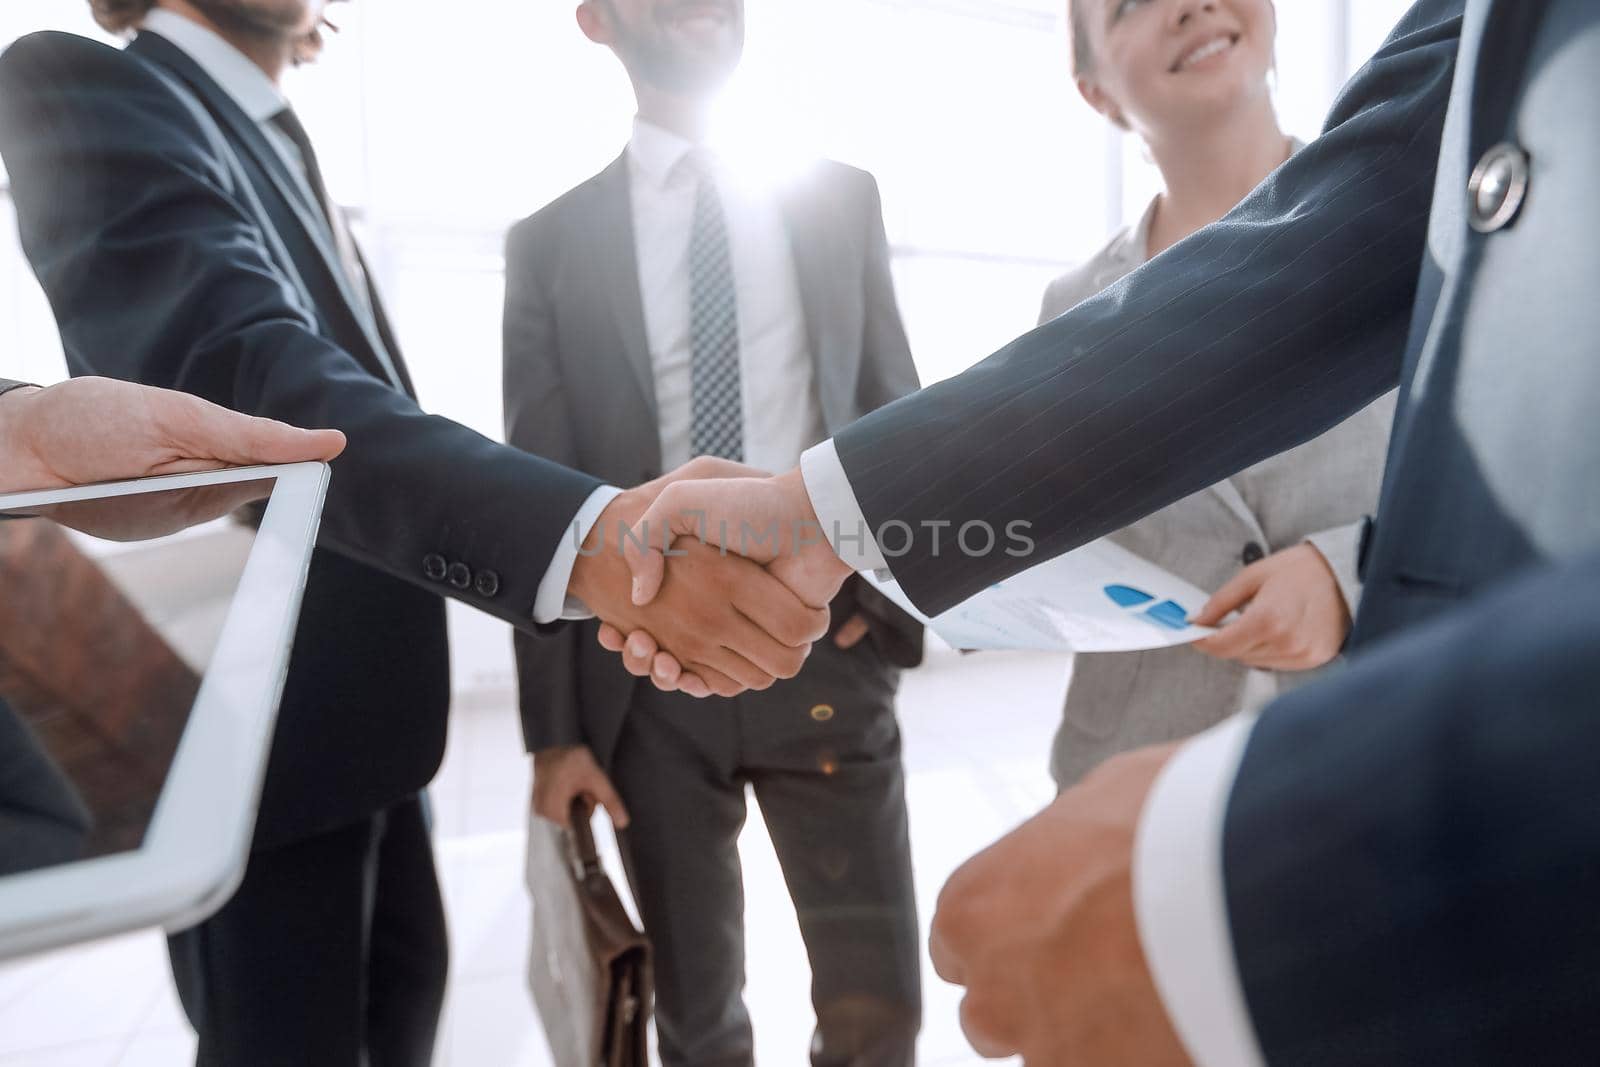 employees look at the handshake business partners by asdf